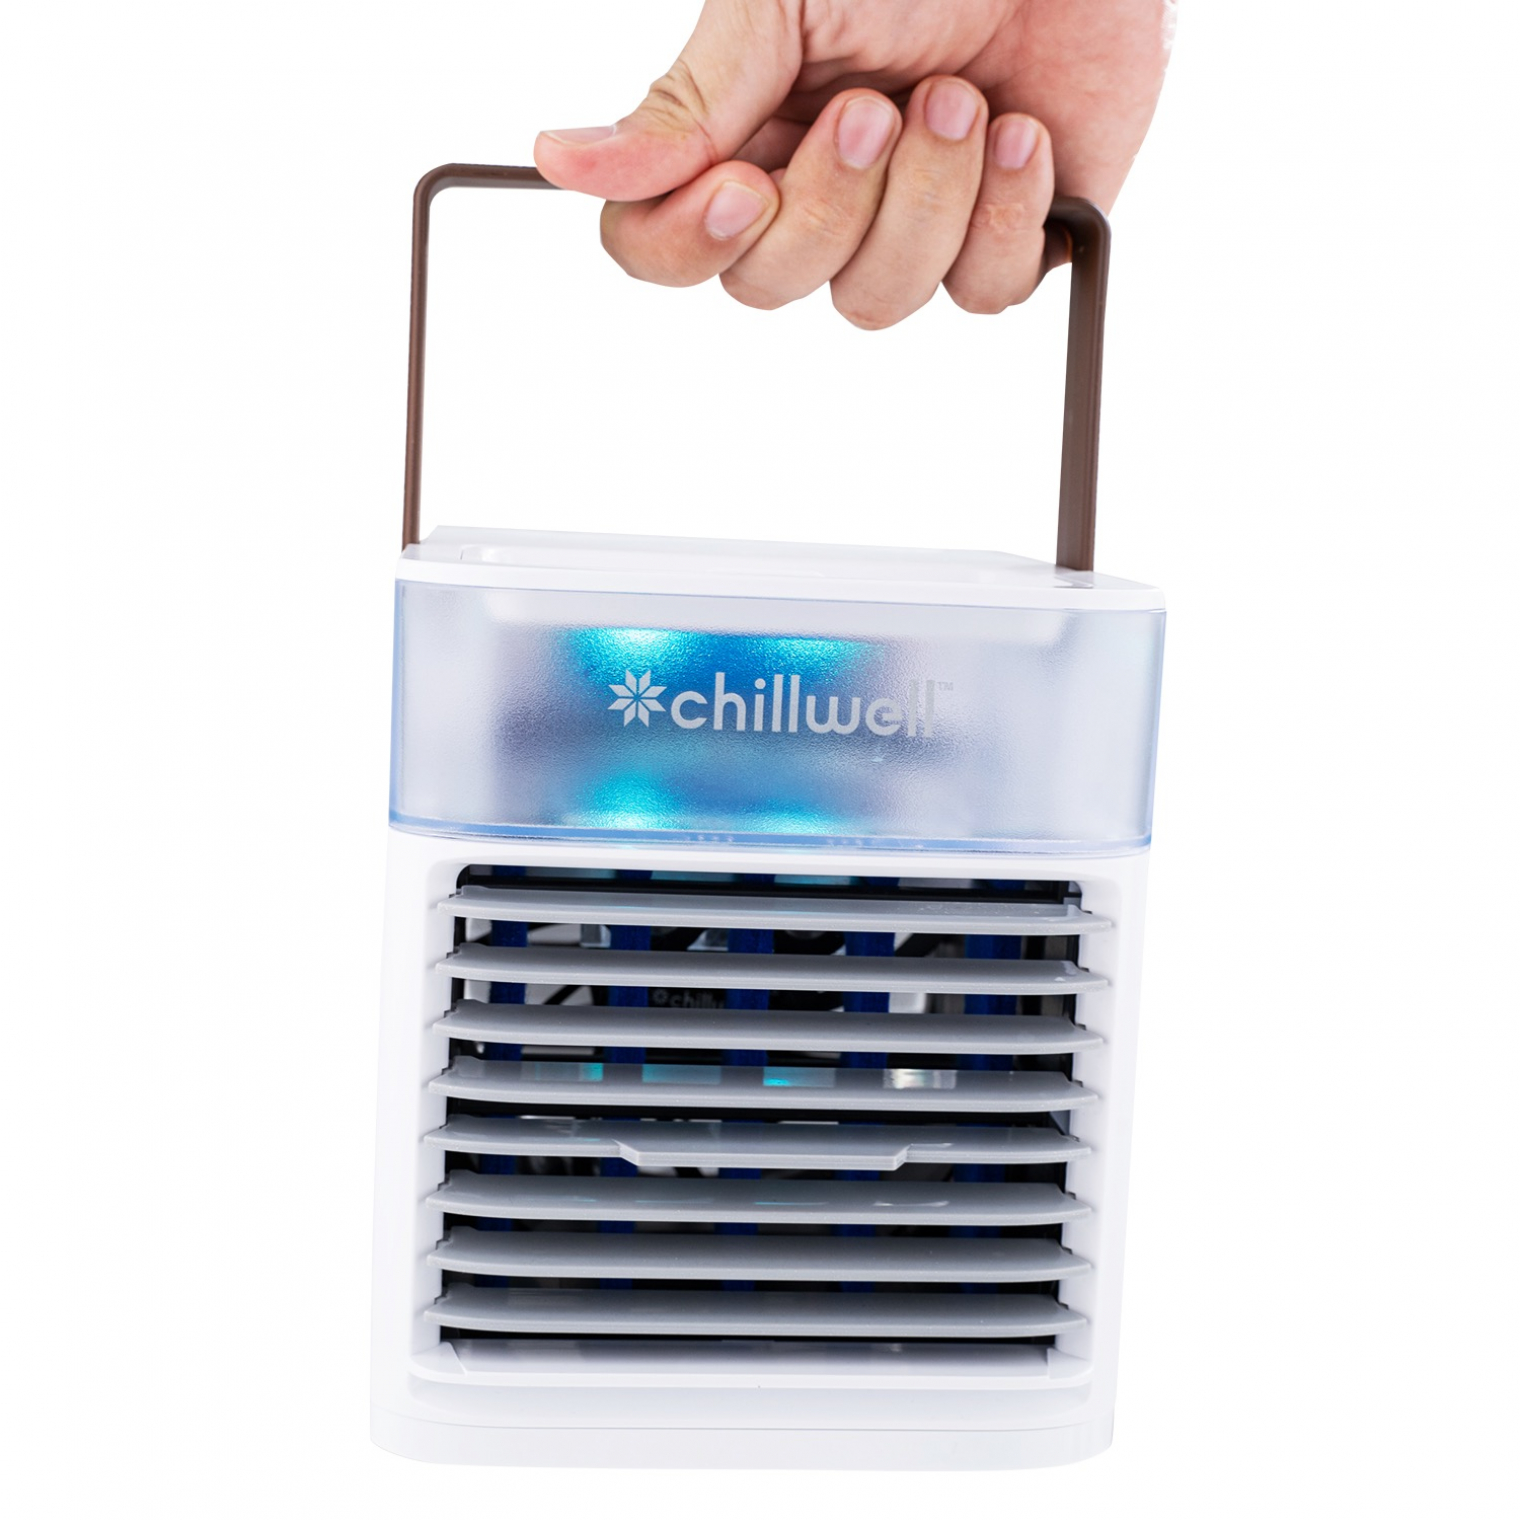 Where To Buy Chillwell Ac Near Me